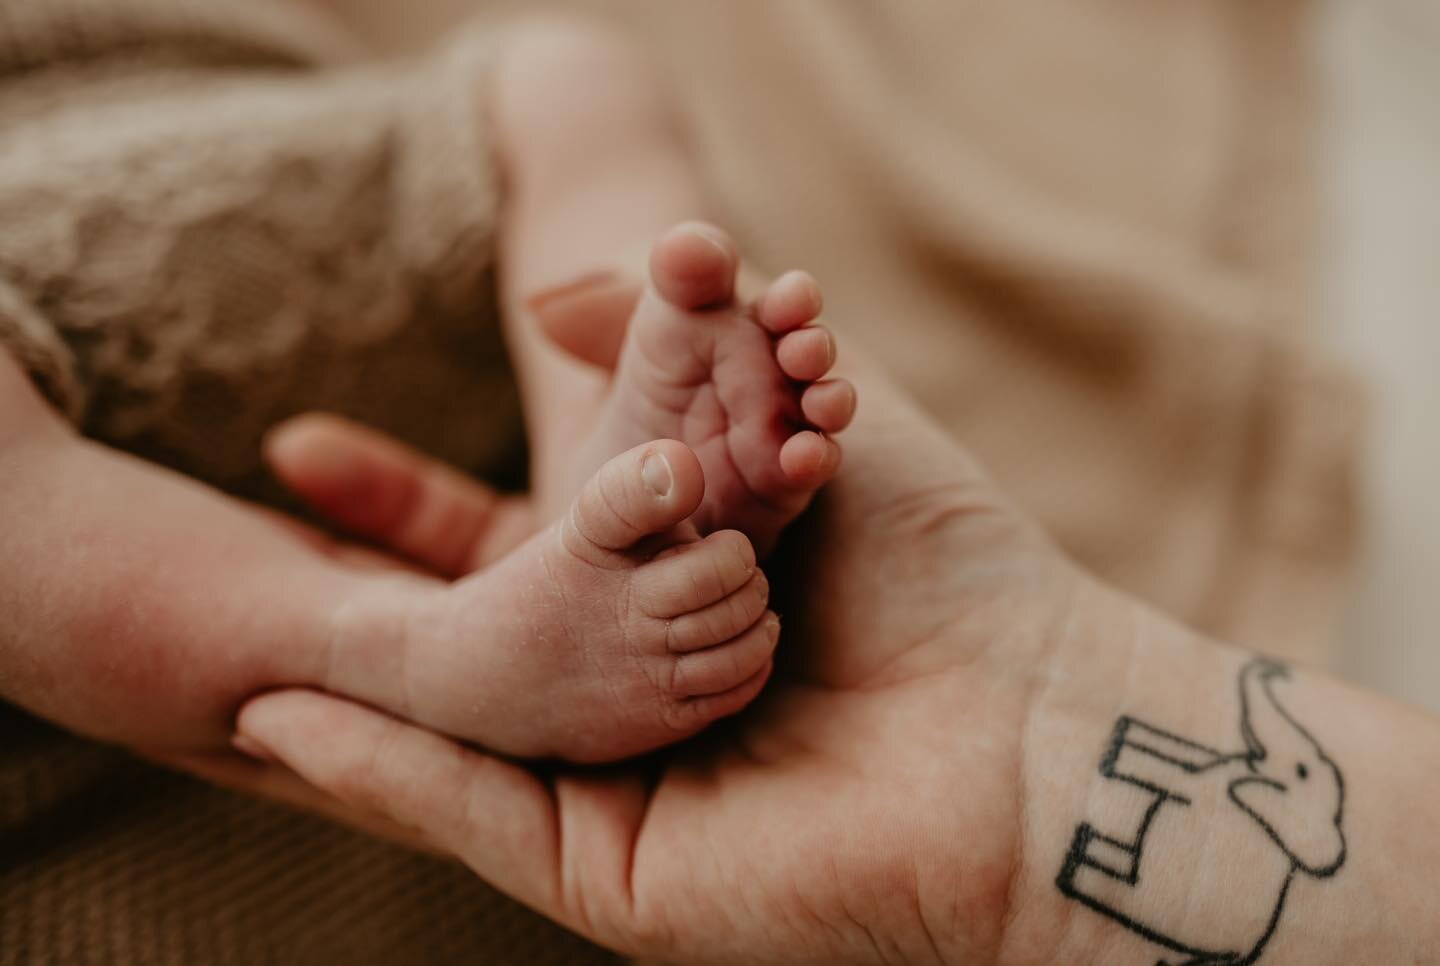 baby feet are just the sweetest aren&rsquo;t they 👣✨
.
.
#twowildflowersphotography #melbournefamilyphotographer #melbournenewbornphotographer #newbornphotographermelbourne #newborn #newbornboy #newbornphotography #newbornphotographer #newbornbaby #